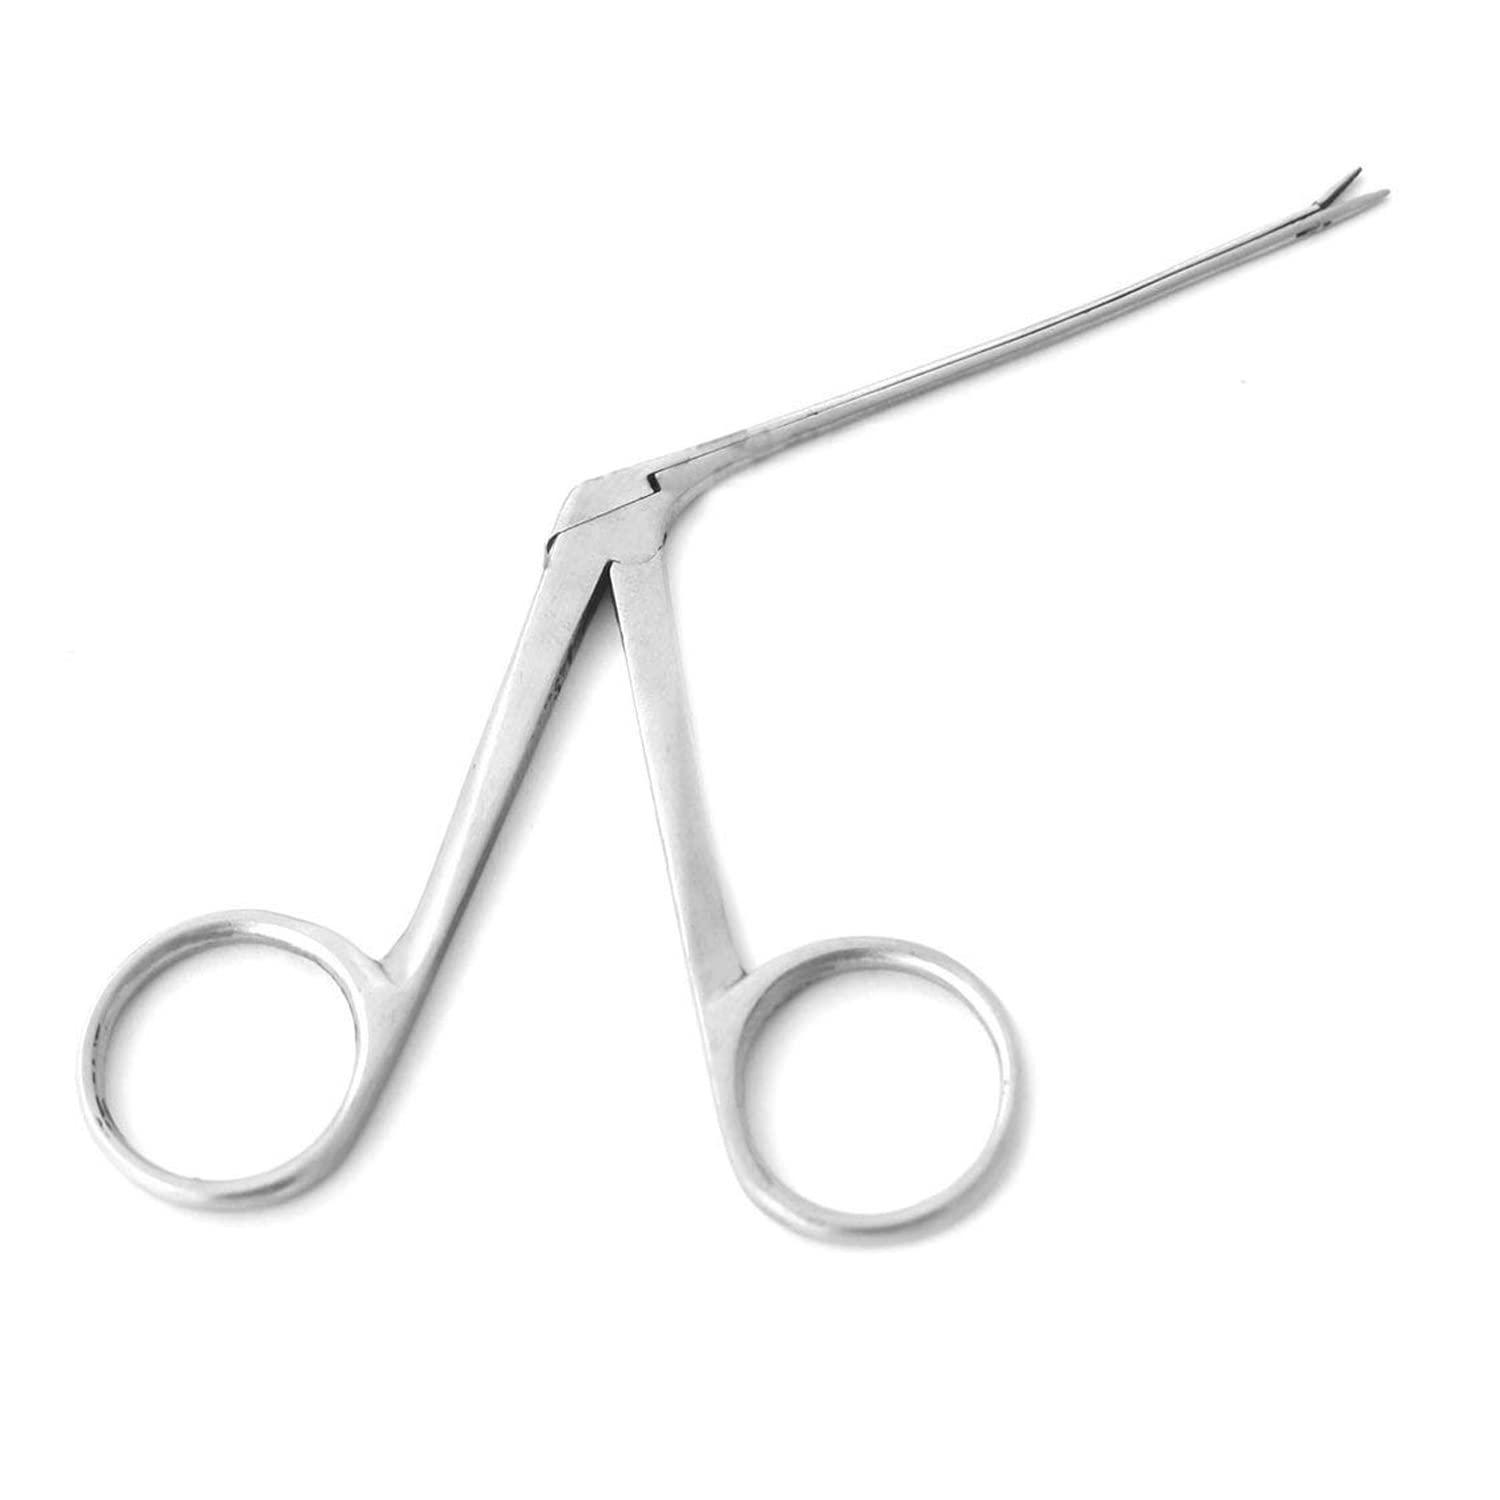 precise canada-3.5 3.5" alligator forceps 3 1/2", stainless steel